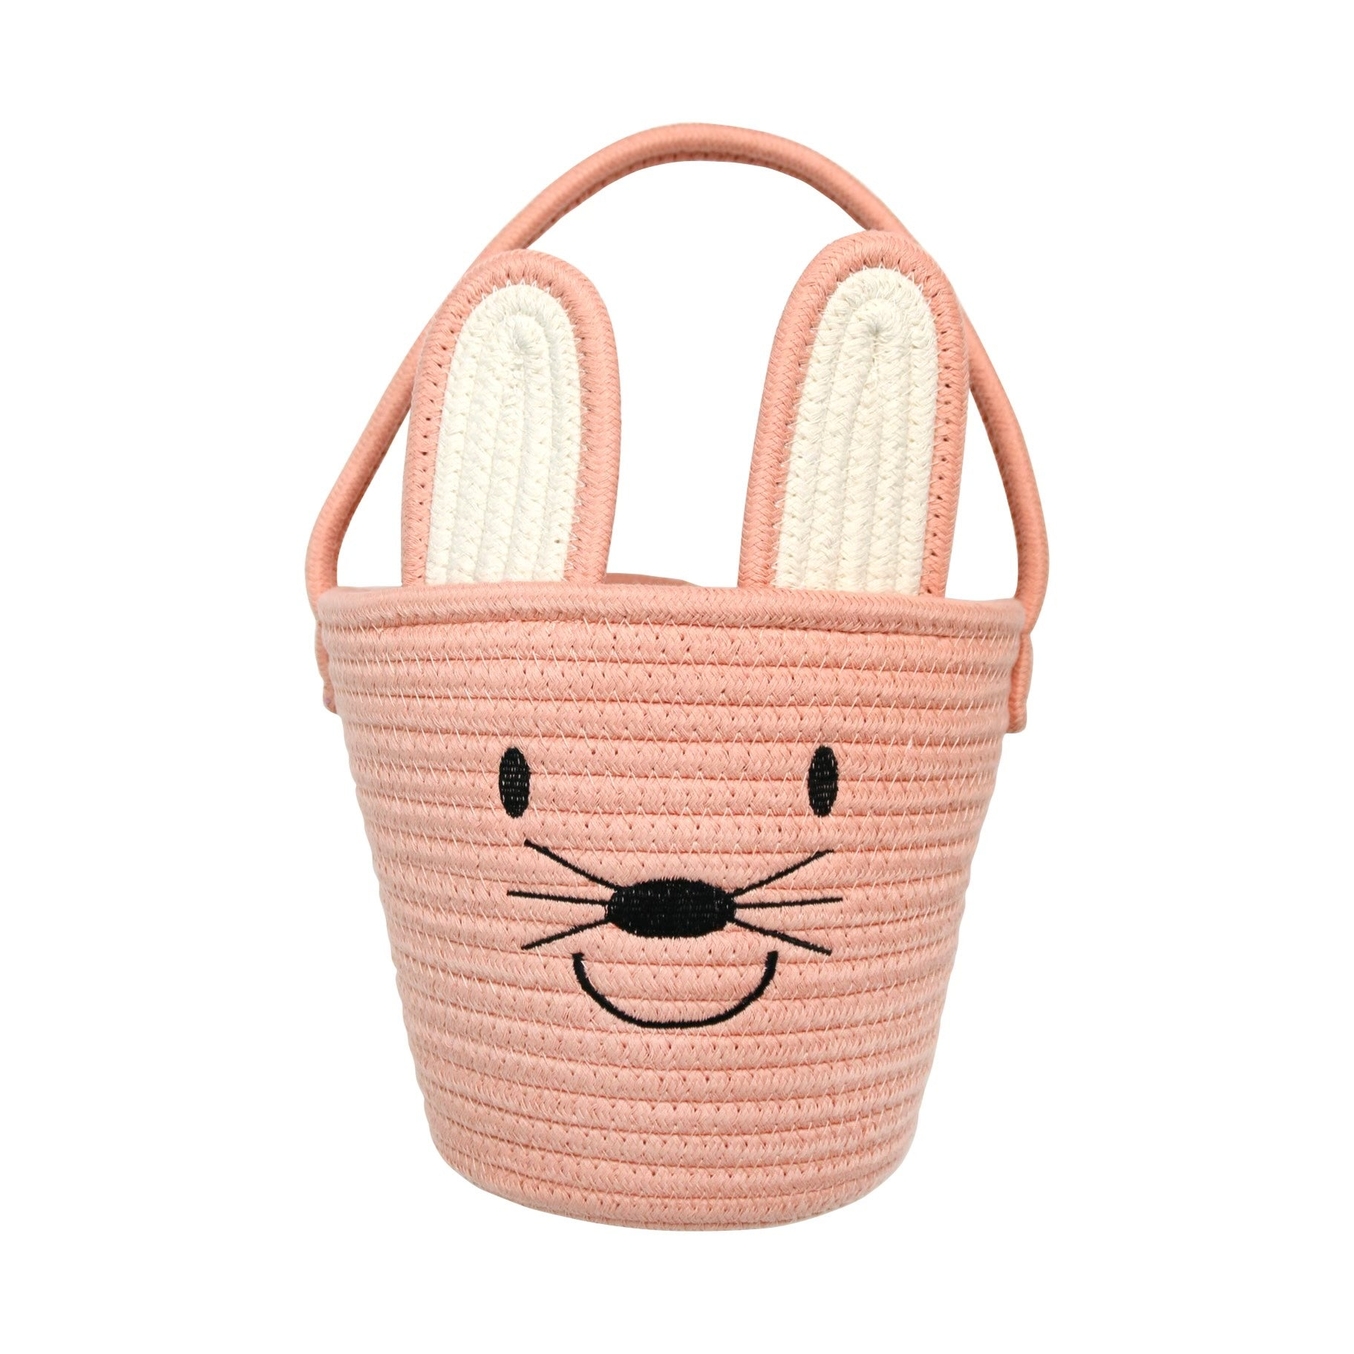 Emerson and Friends Rope Easter Basket in Pink Bunny